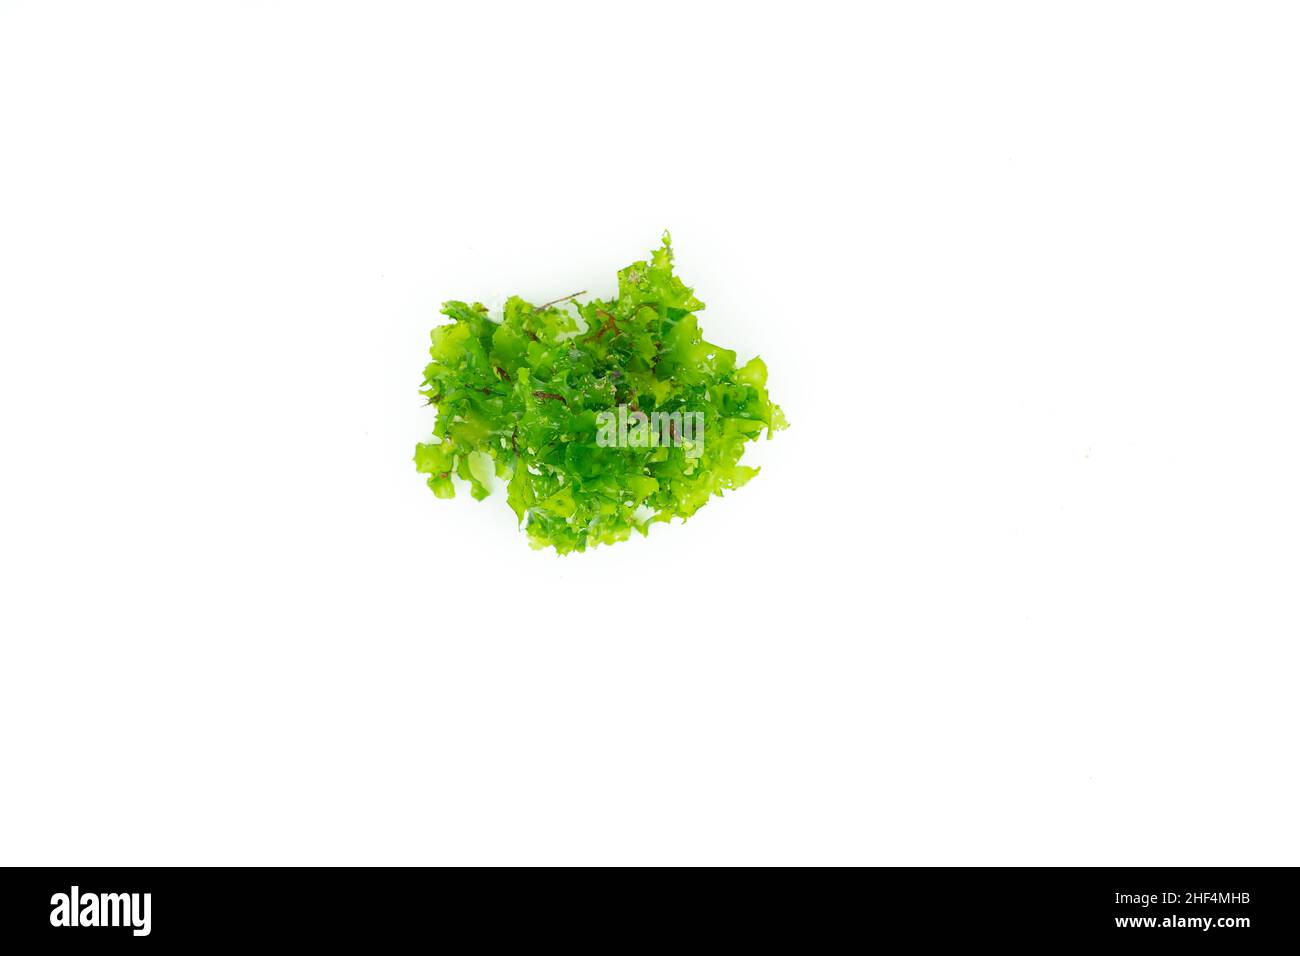 Sea lettuce, green seaweed on white background. Copy space. Top view. Stock Photo